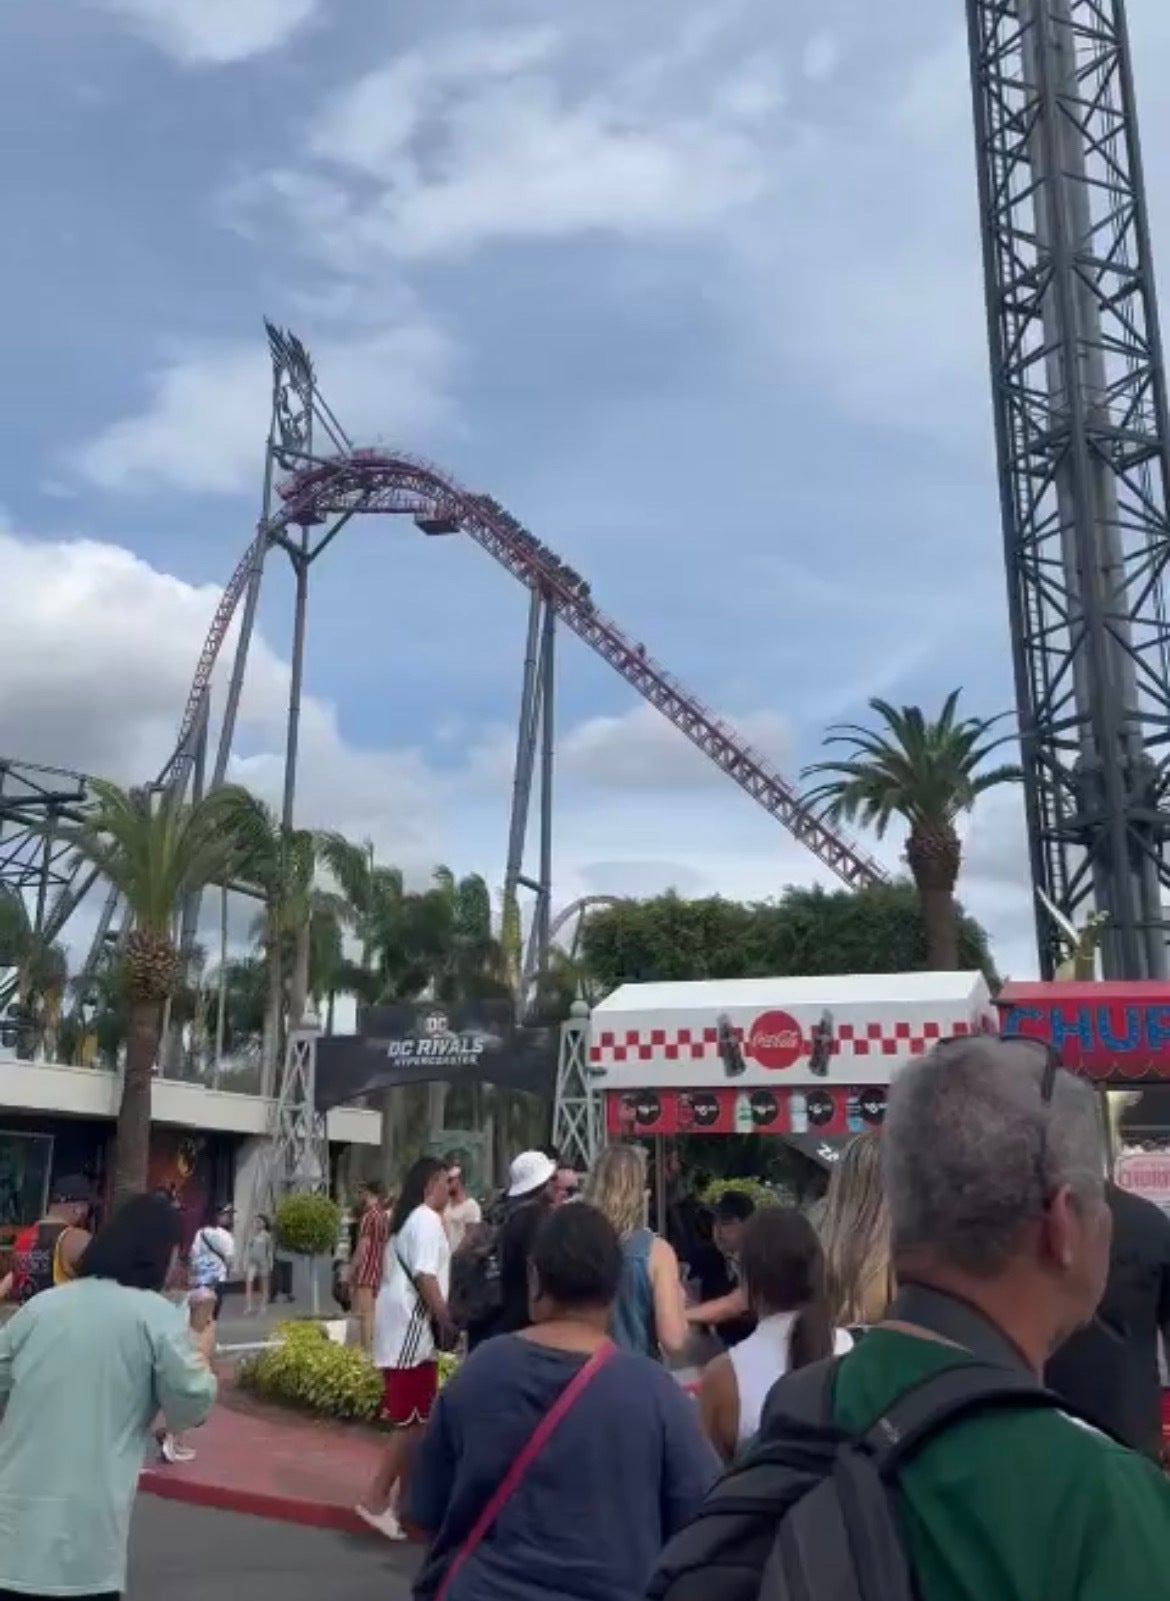 Horrified theme-park goers looked on as passengers on board were evacuated